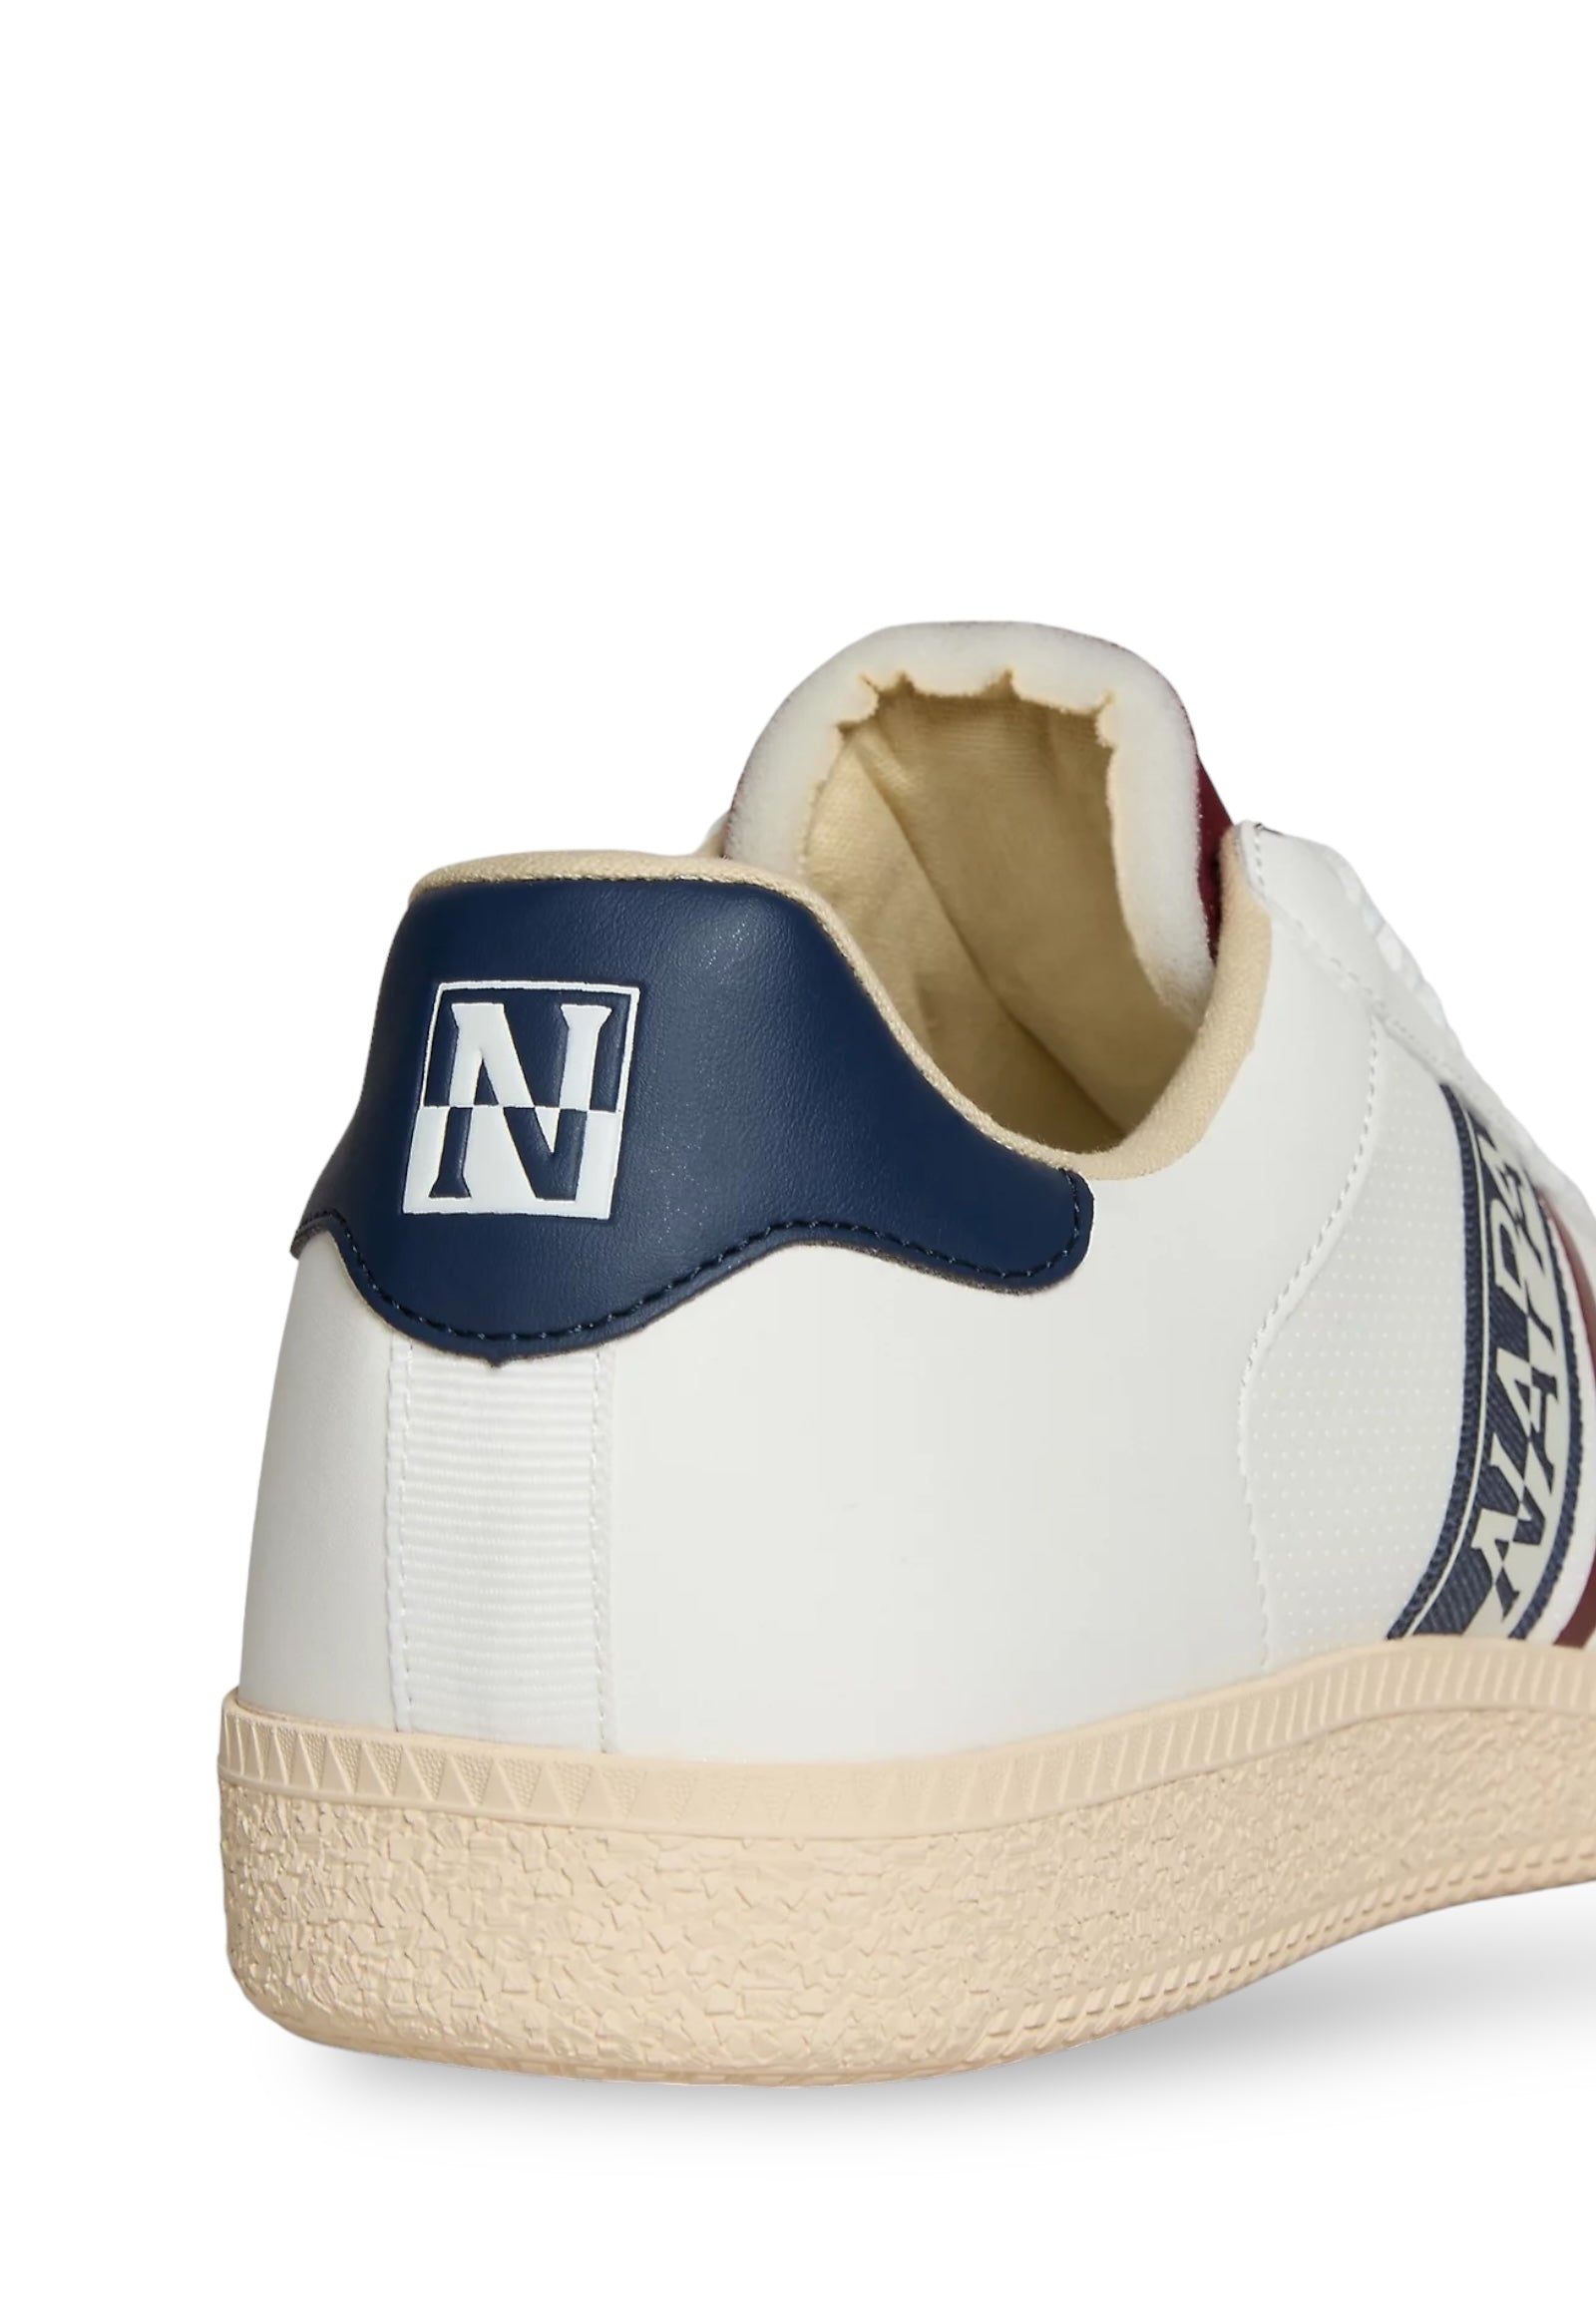 Sneakers Np0a4i7m WhitE-NavY-Red